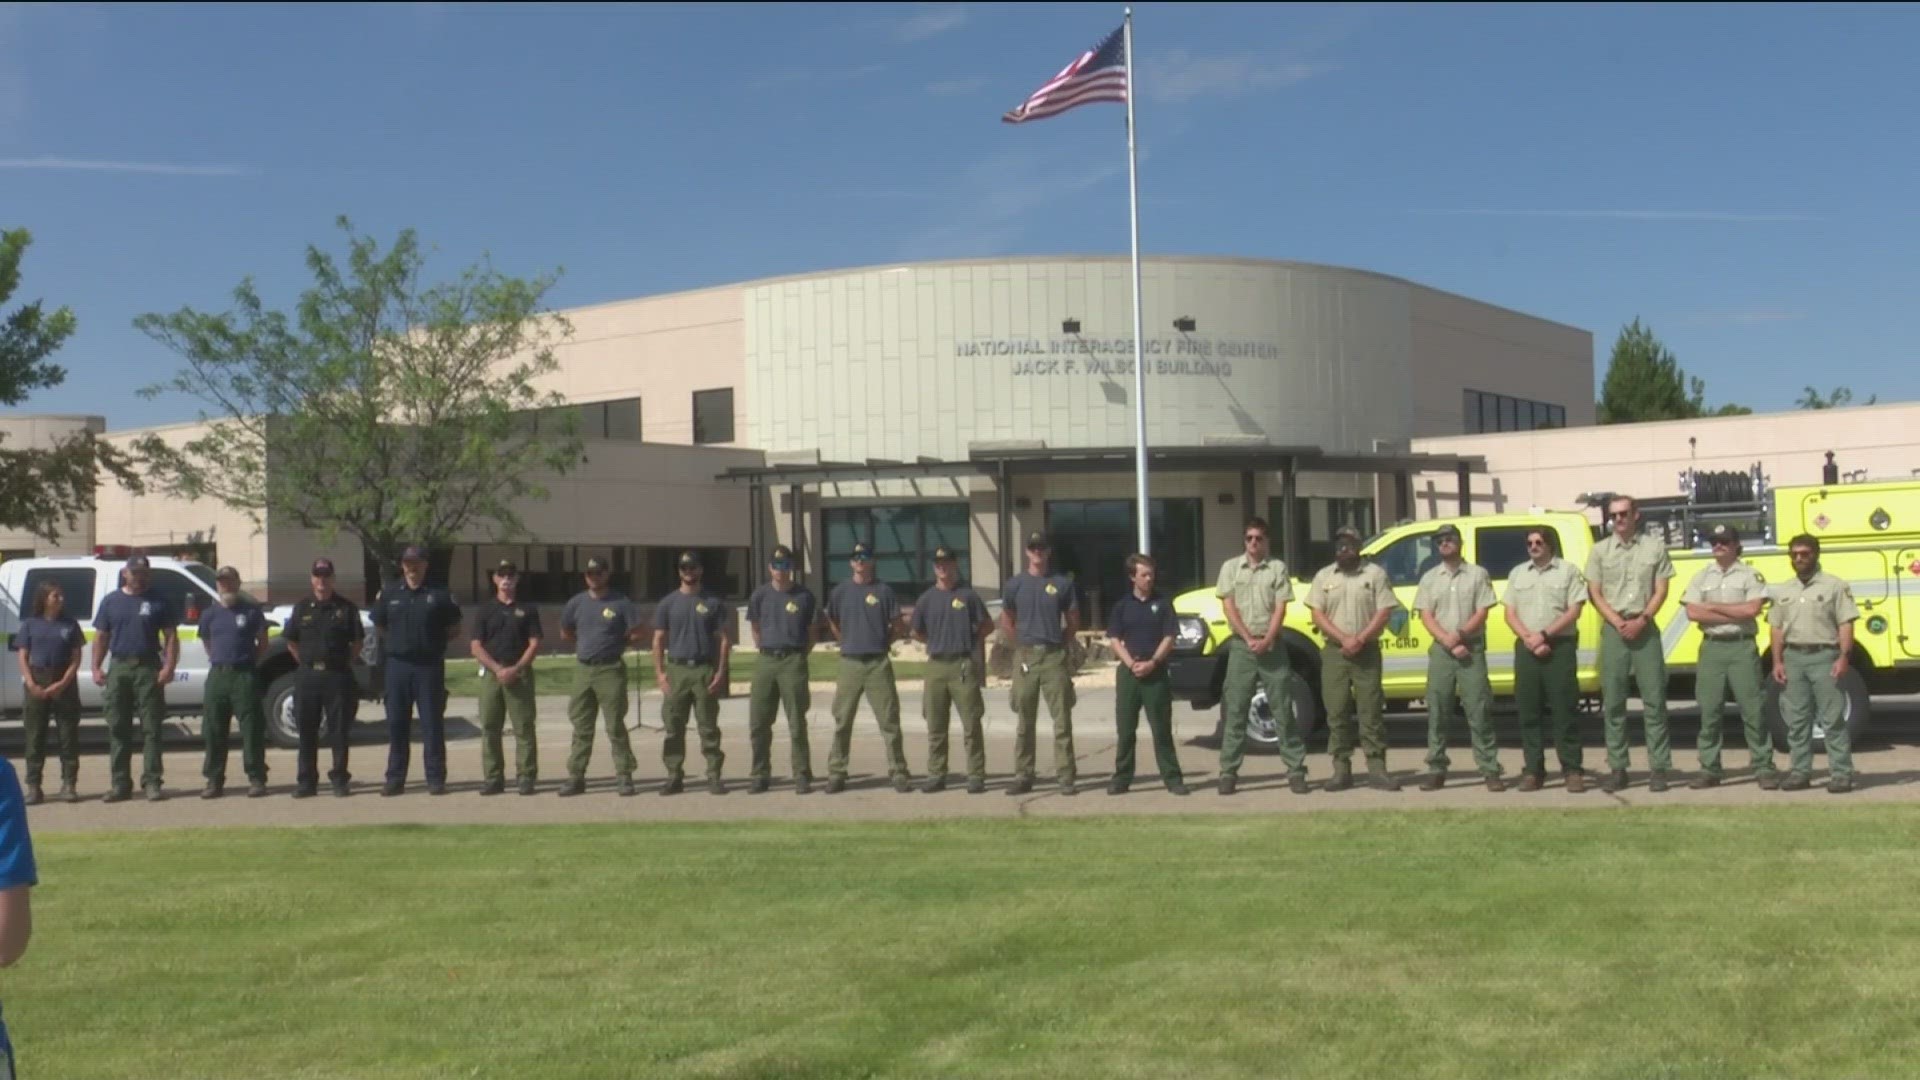 NIFC said the day is intended to recognize the dedication of wildland firefighters, including federal, state, local, rural, contract, and support personnel.